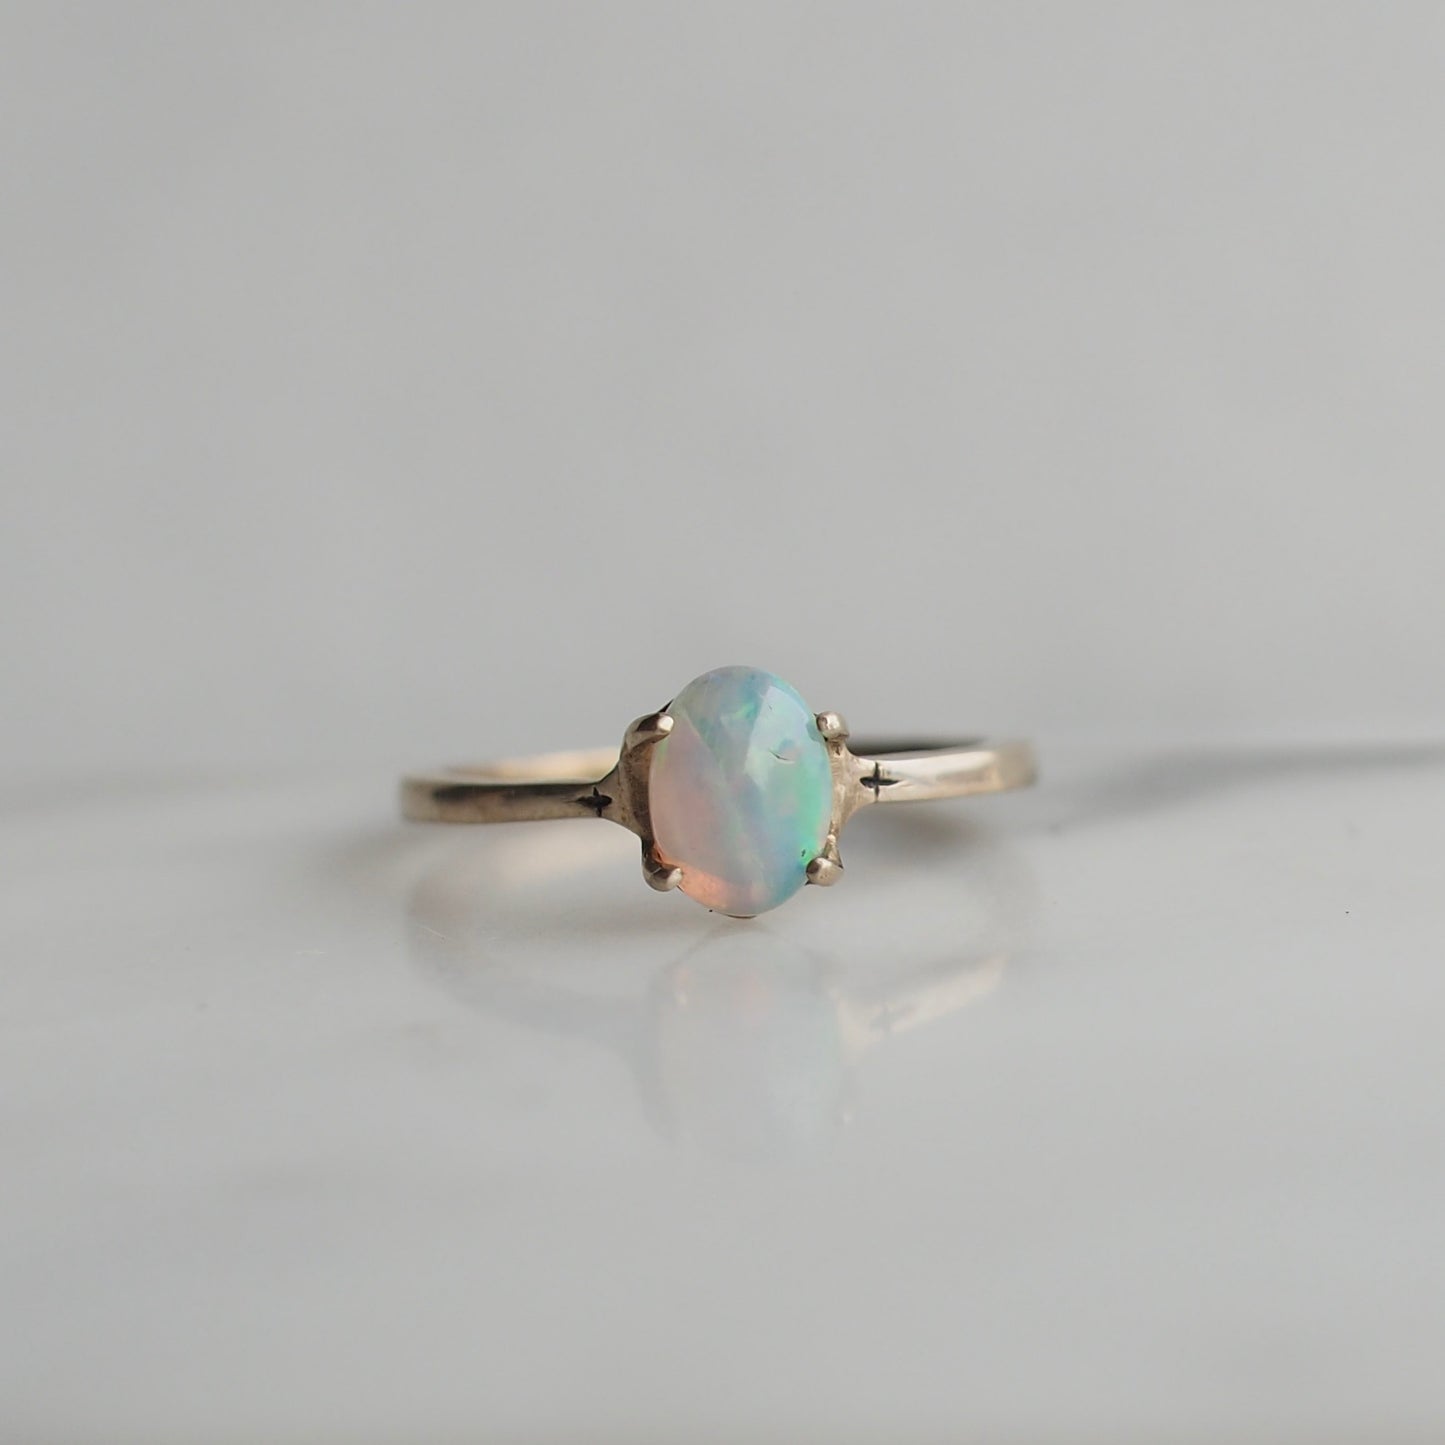 Star engraved Oval Opal Ring - One of a Kind